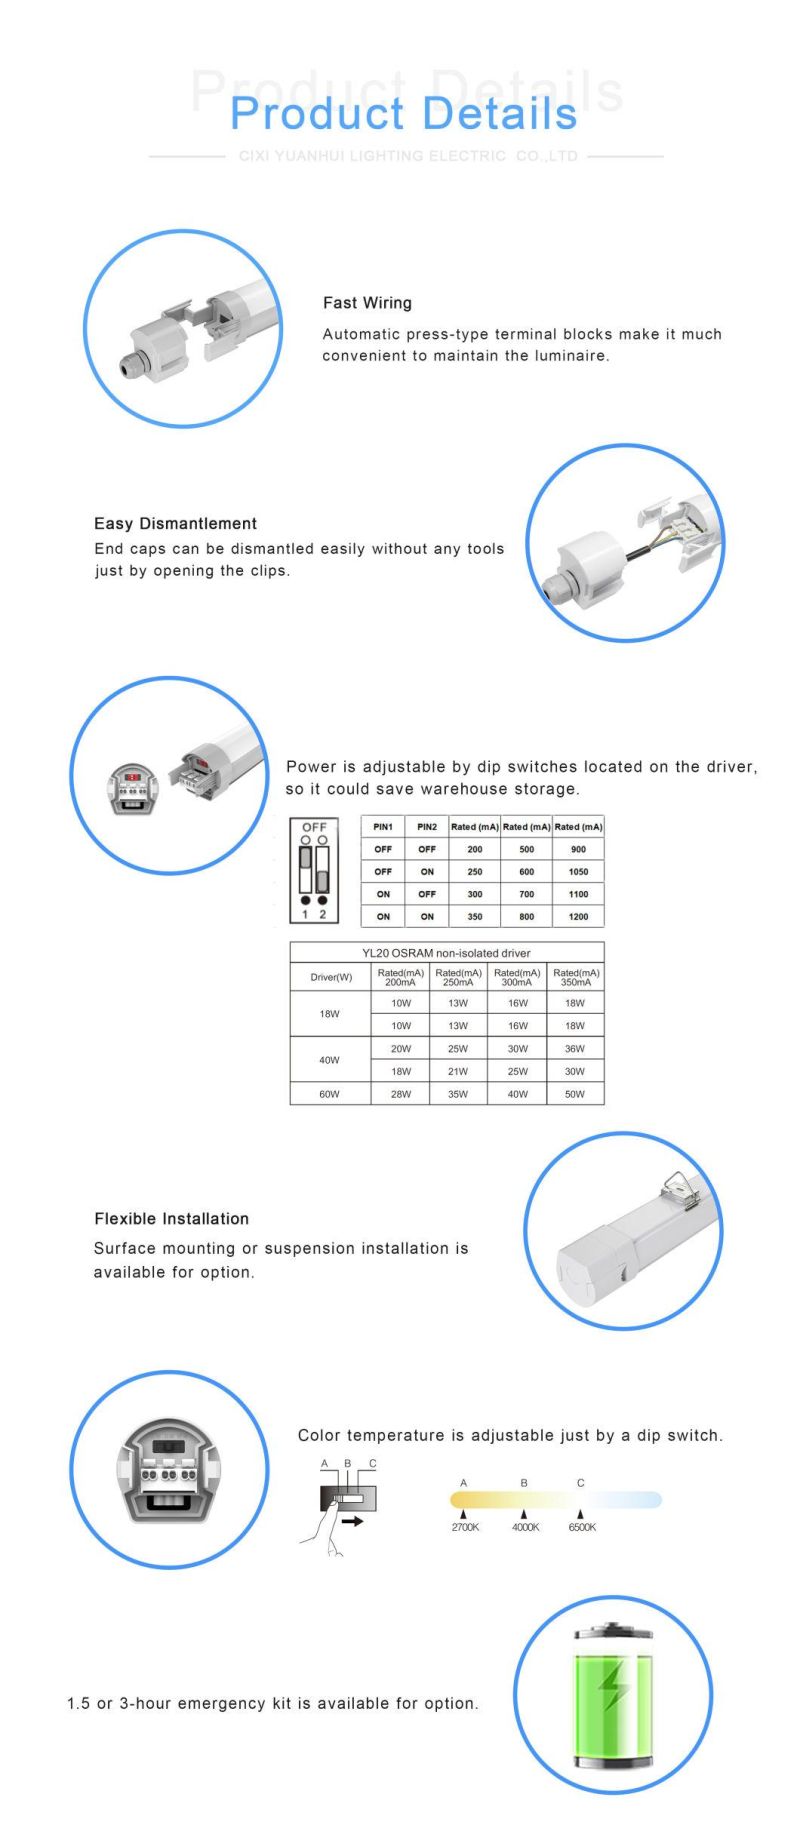 Emergency Battery Triproof LED Factor Price Model Yl20 Series Luminaire Extrusion Intergrated Light